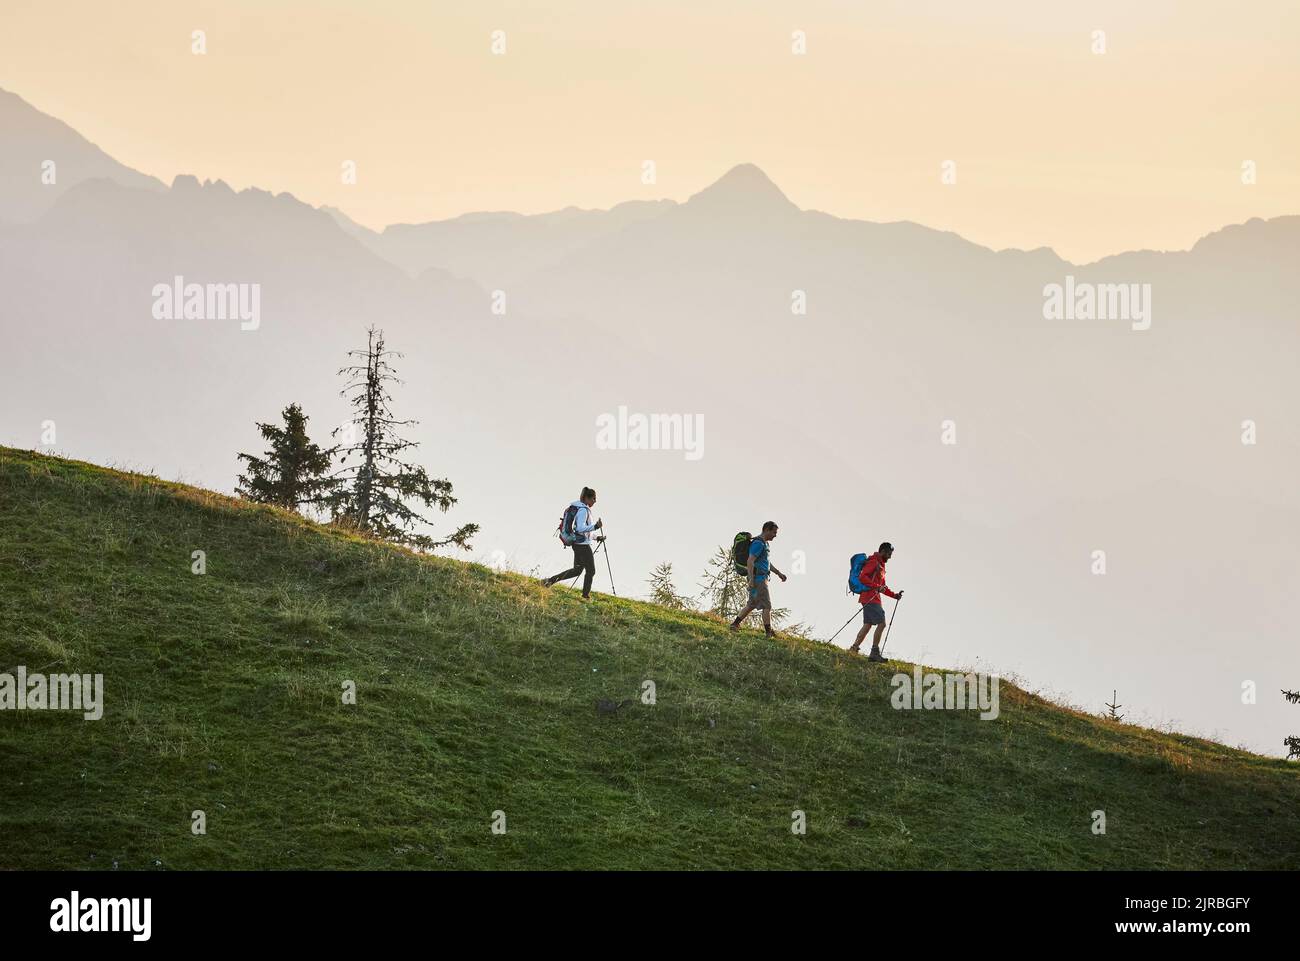 Hikers with hiking poles descending mountain, Mutters, Tyrol, Austria Stock Photo